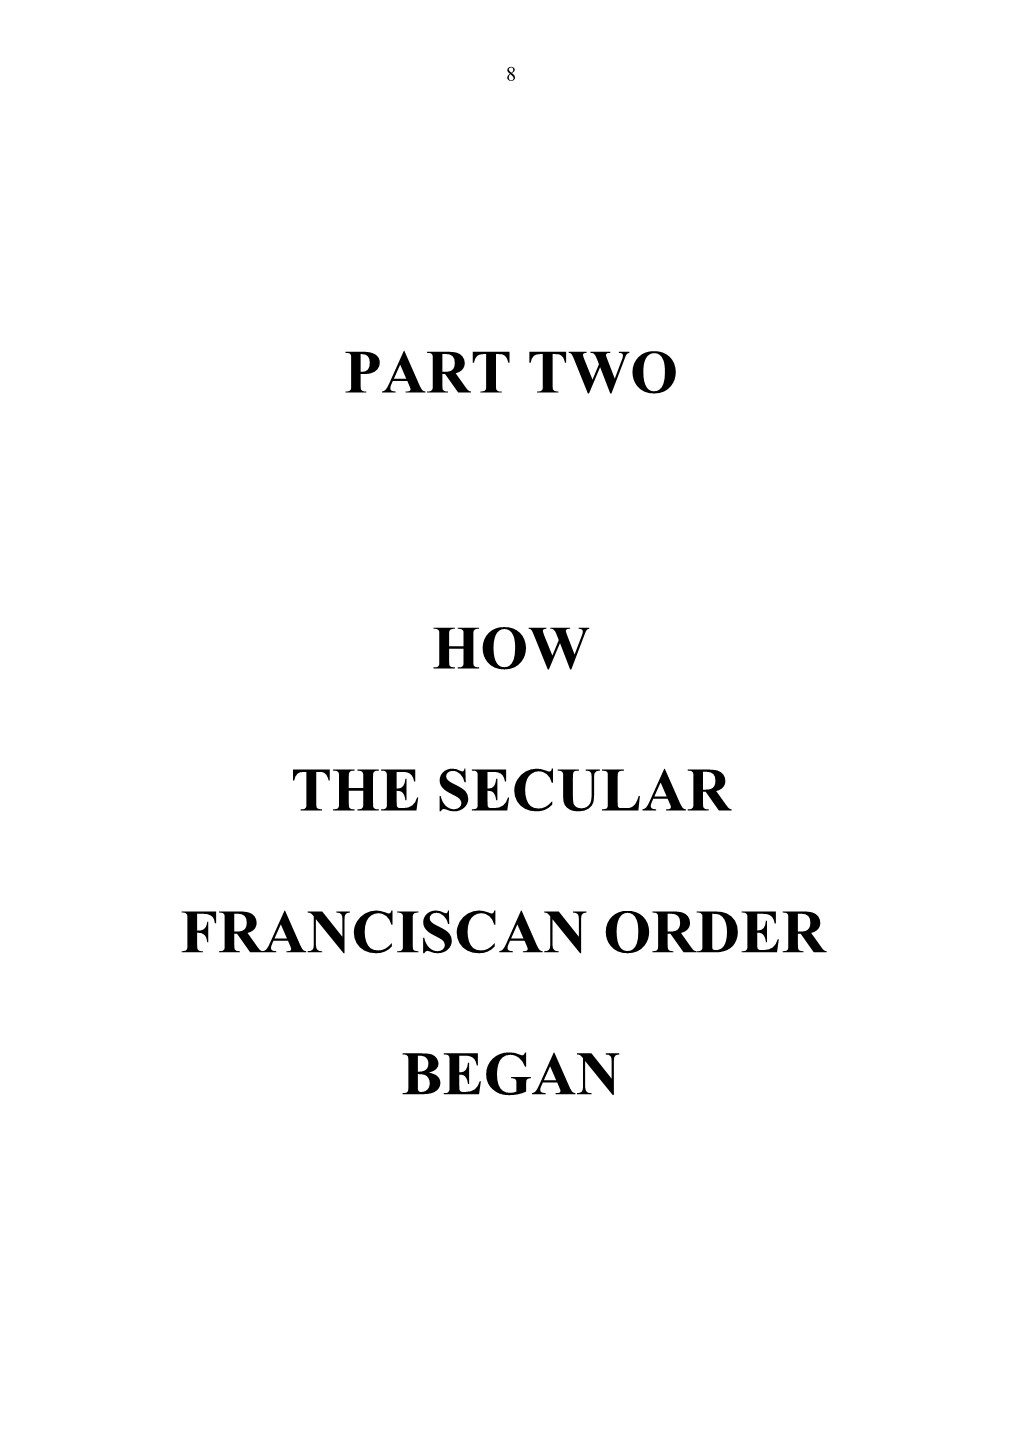 Lesson 6: How Did the Third Order of St Francis Start?